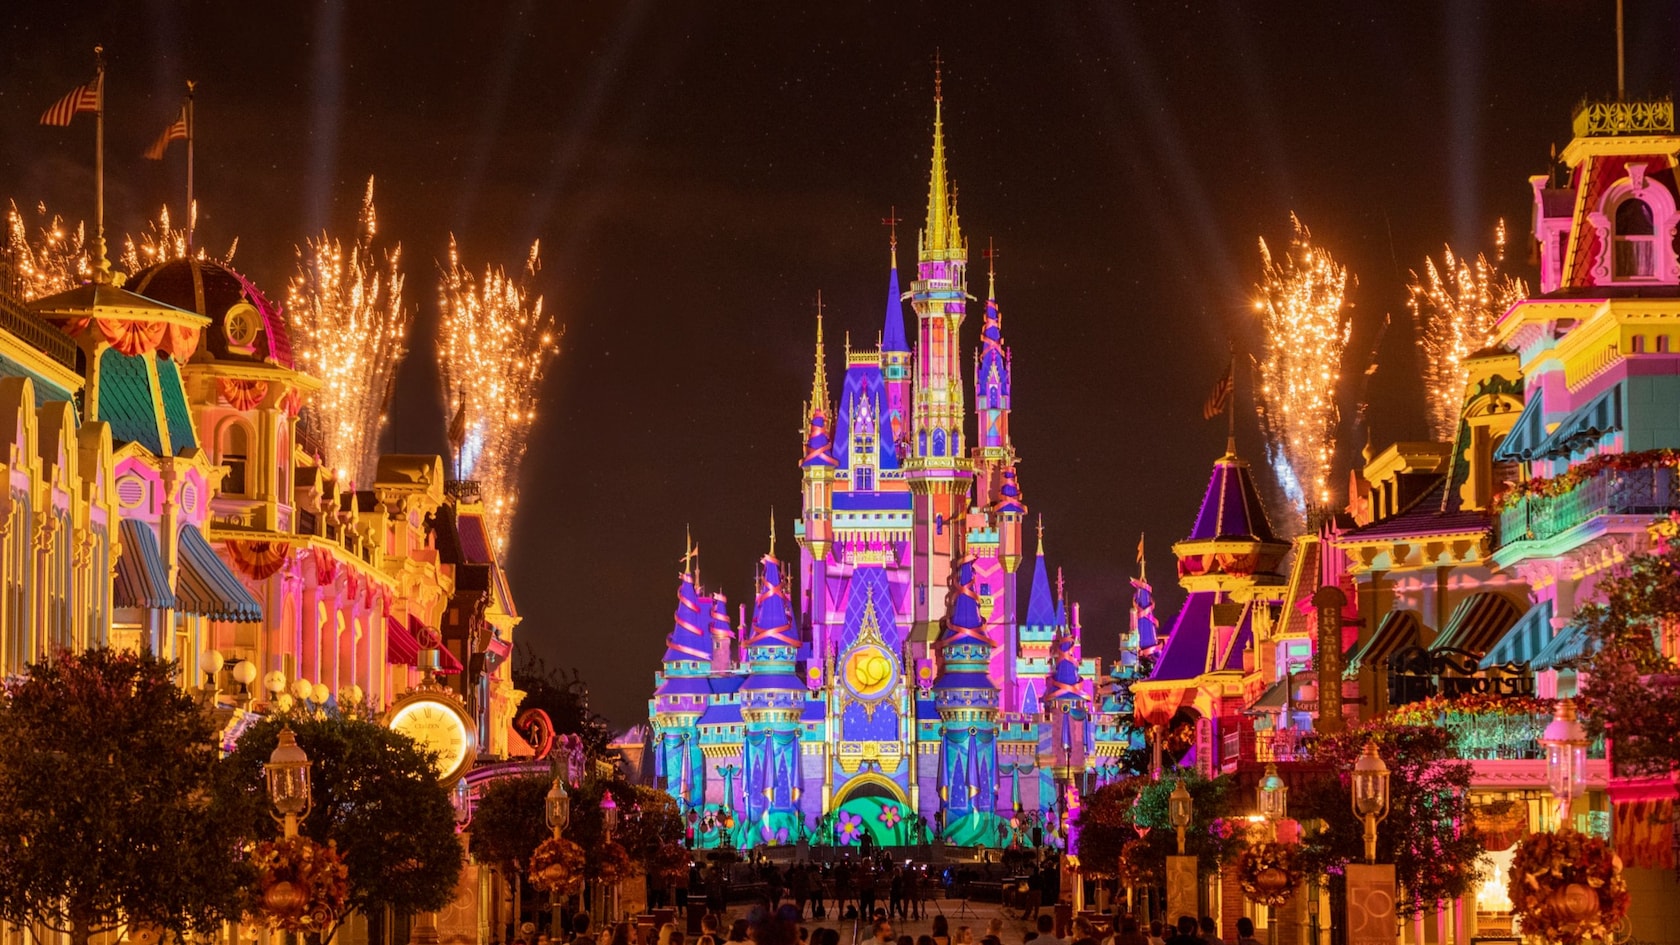 Disney Enchantment A New Nighttime Spectacular featuring Fireworks